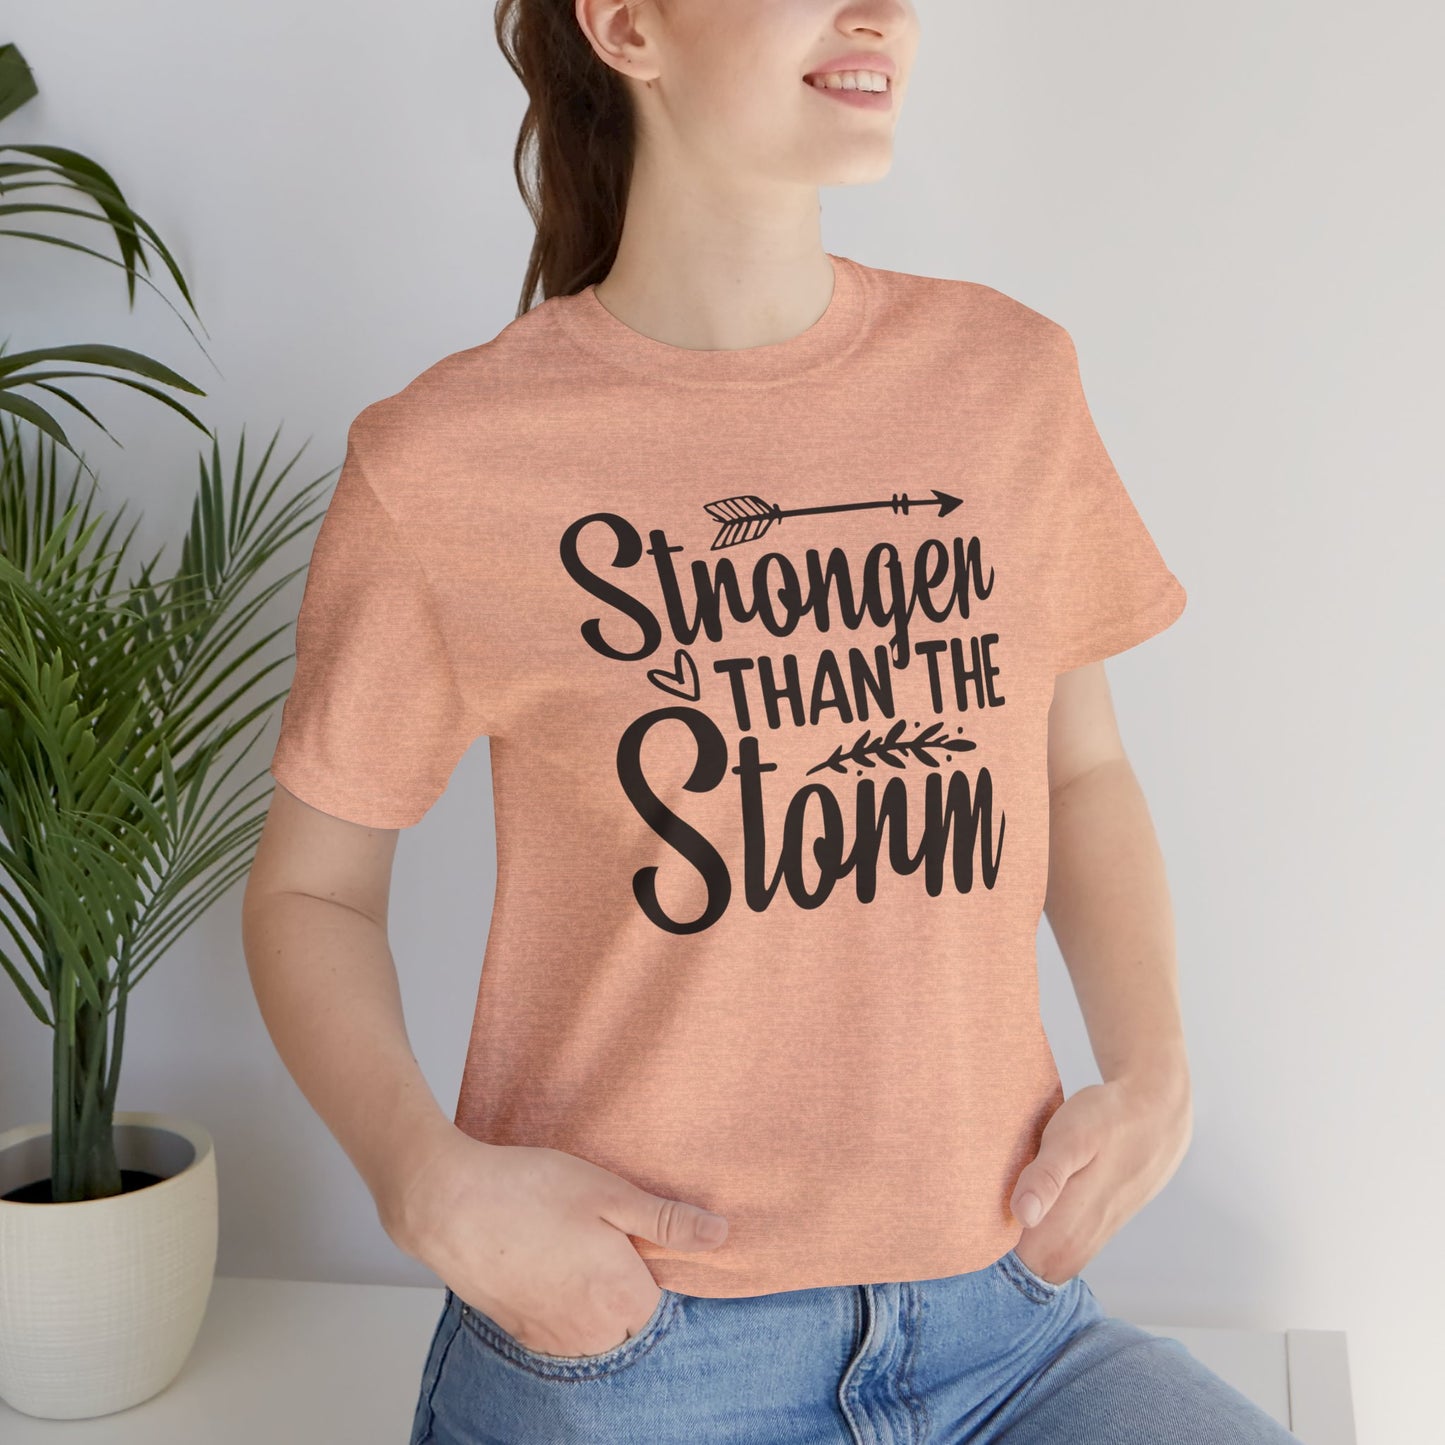 Stronger Than The Storm - Soft Cotton Adult Unisex T-Shirt, Gift for friends and family, Gift for friends and family by clothezy.com - Buy Now